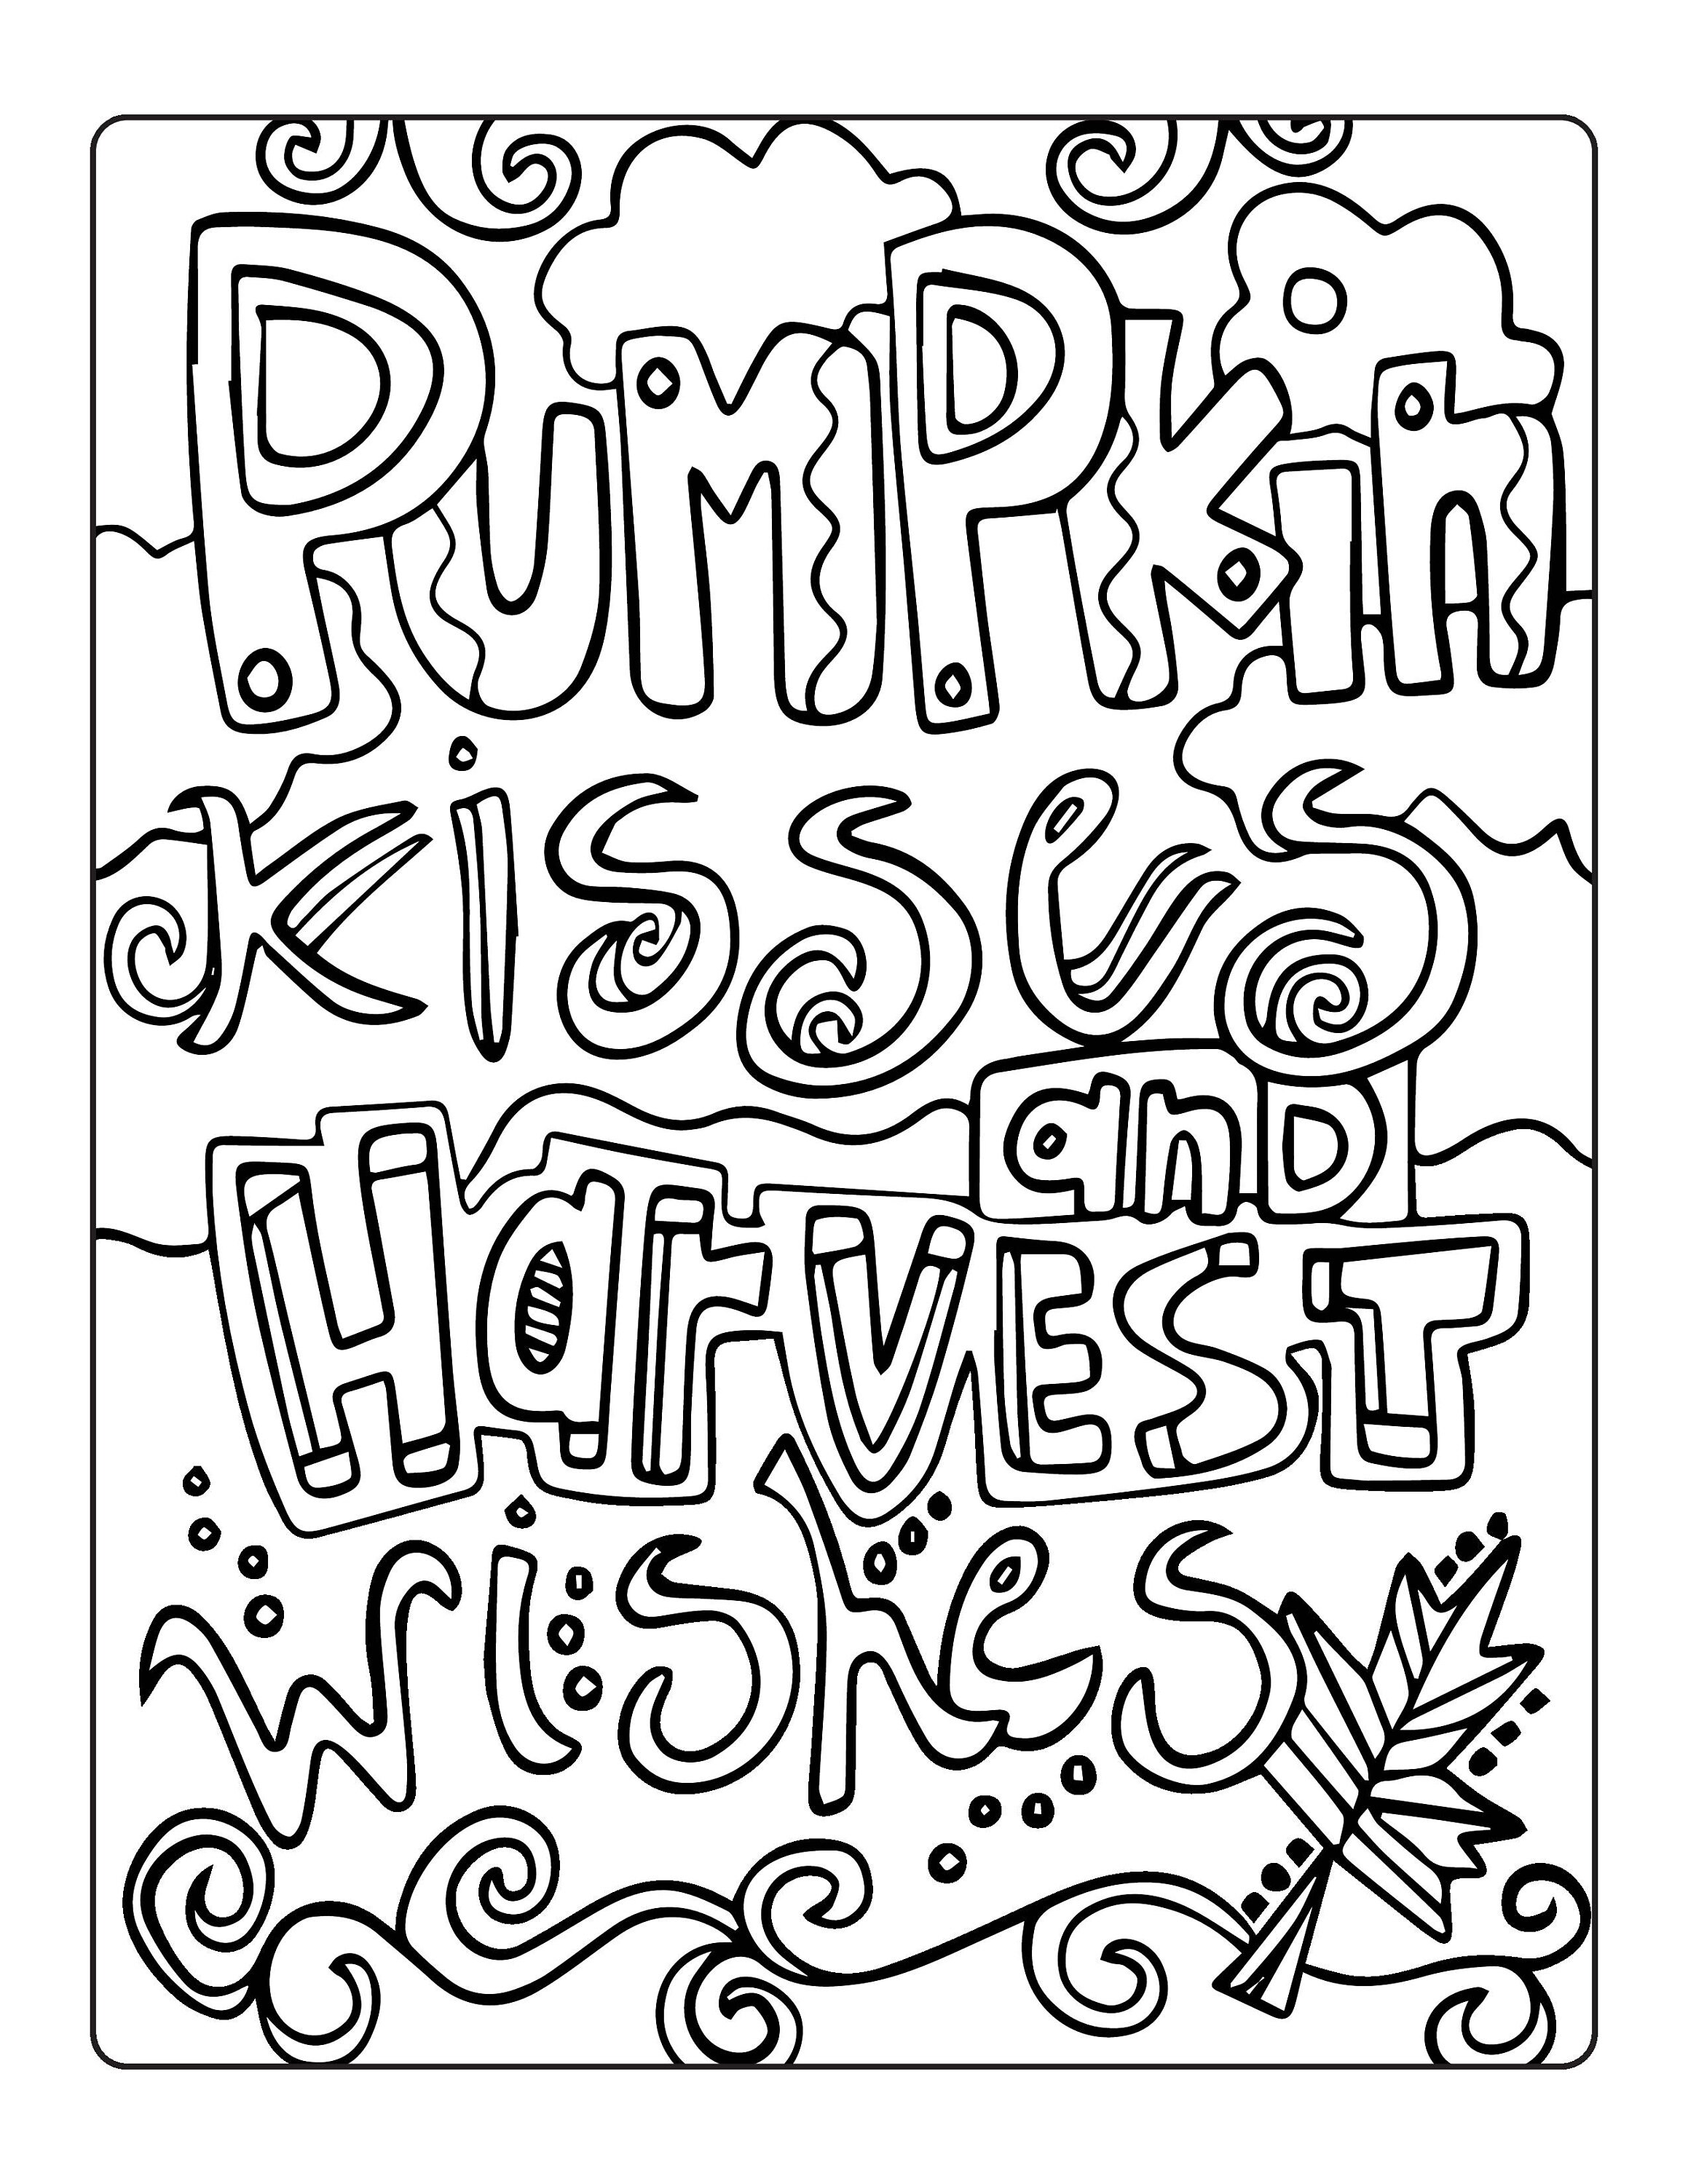 Adult coloring page thanksgiving pages printable adult coloring pages growth mindset coloring pages printable coloring pdf